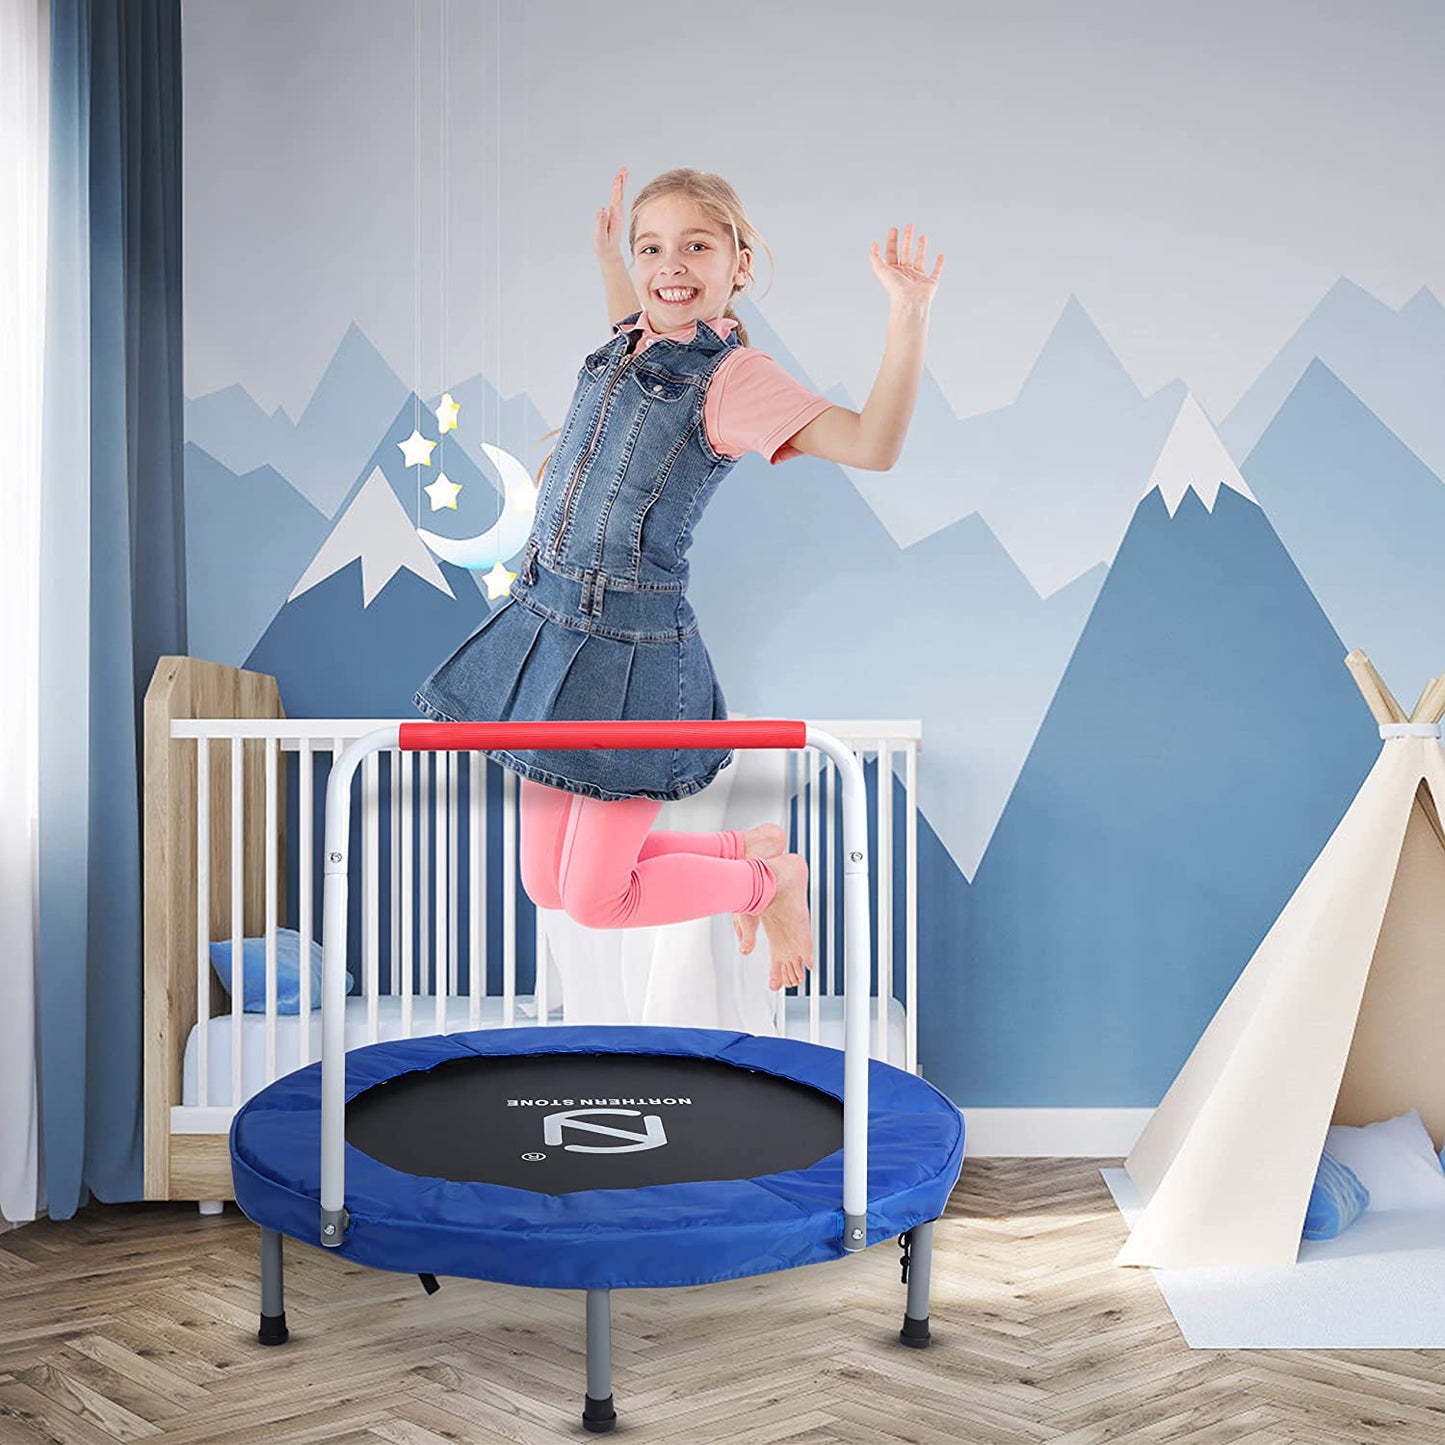 SILVER VALLEY 36" Kids Folding Mini Fitness Trampoline, Safety Padded Cover and Foldable Rebounder Jumper with Handle